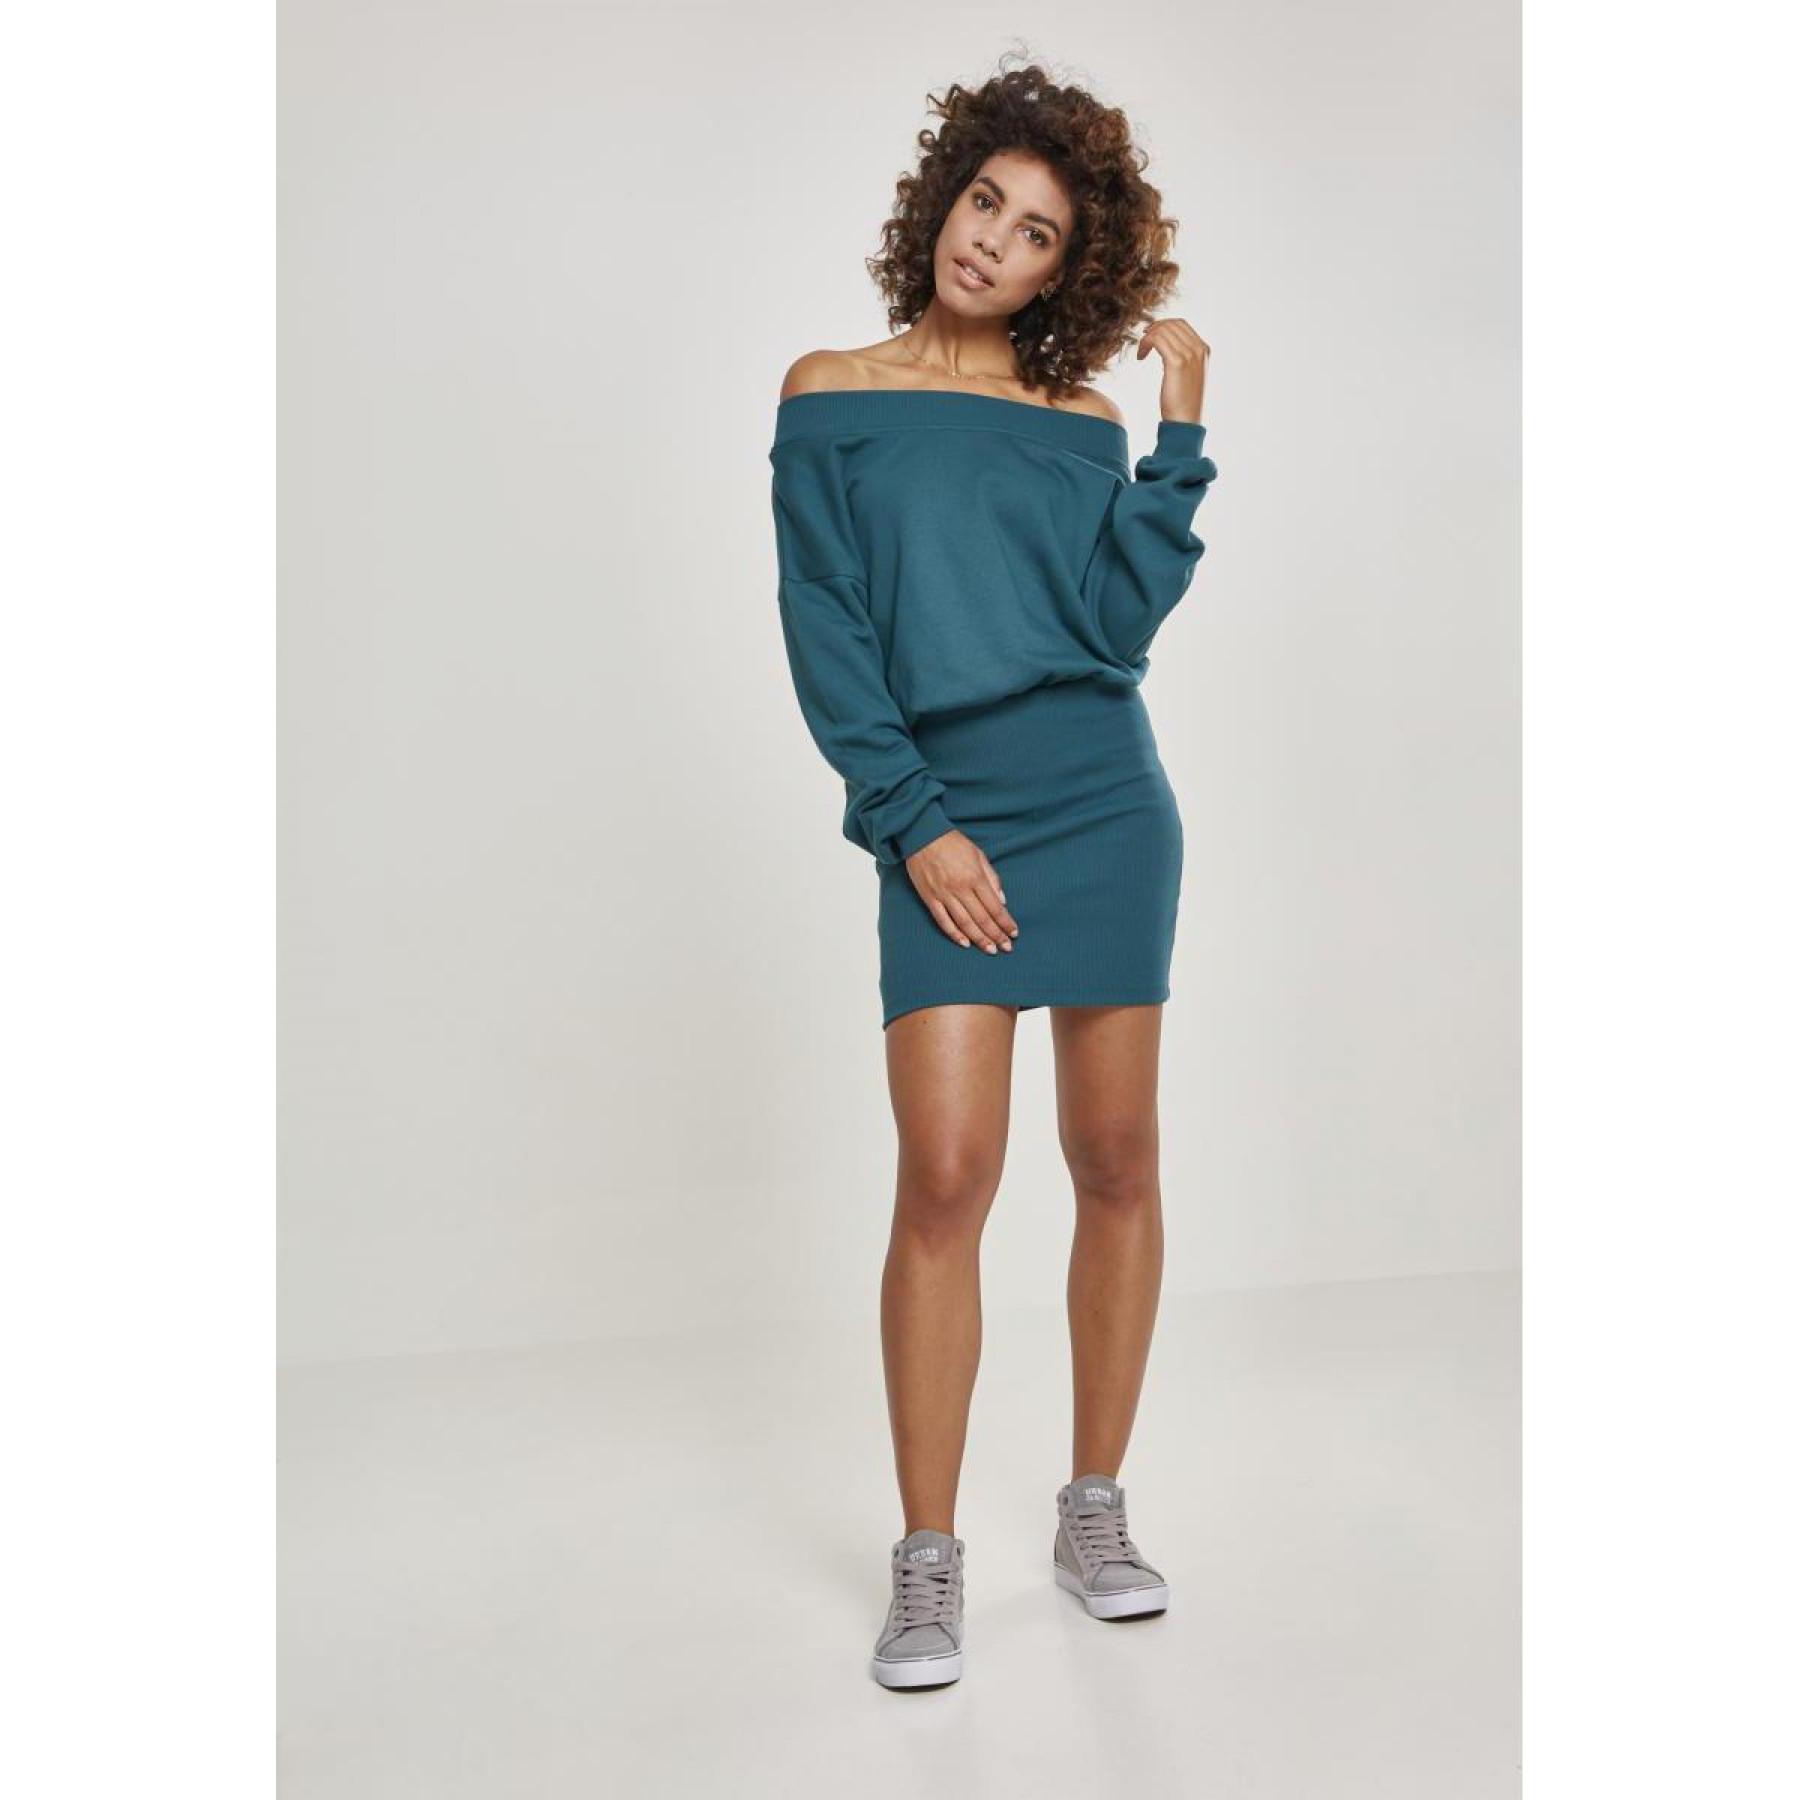 Robe femme grandes tailles Urban Classic sweat